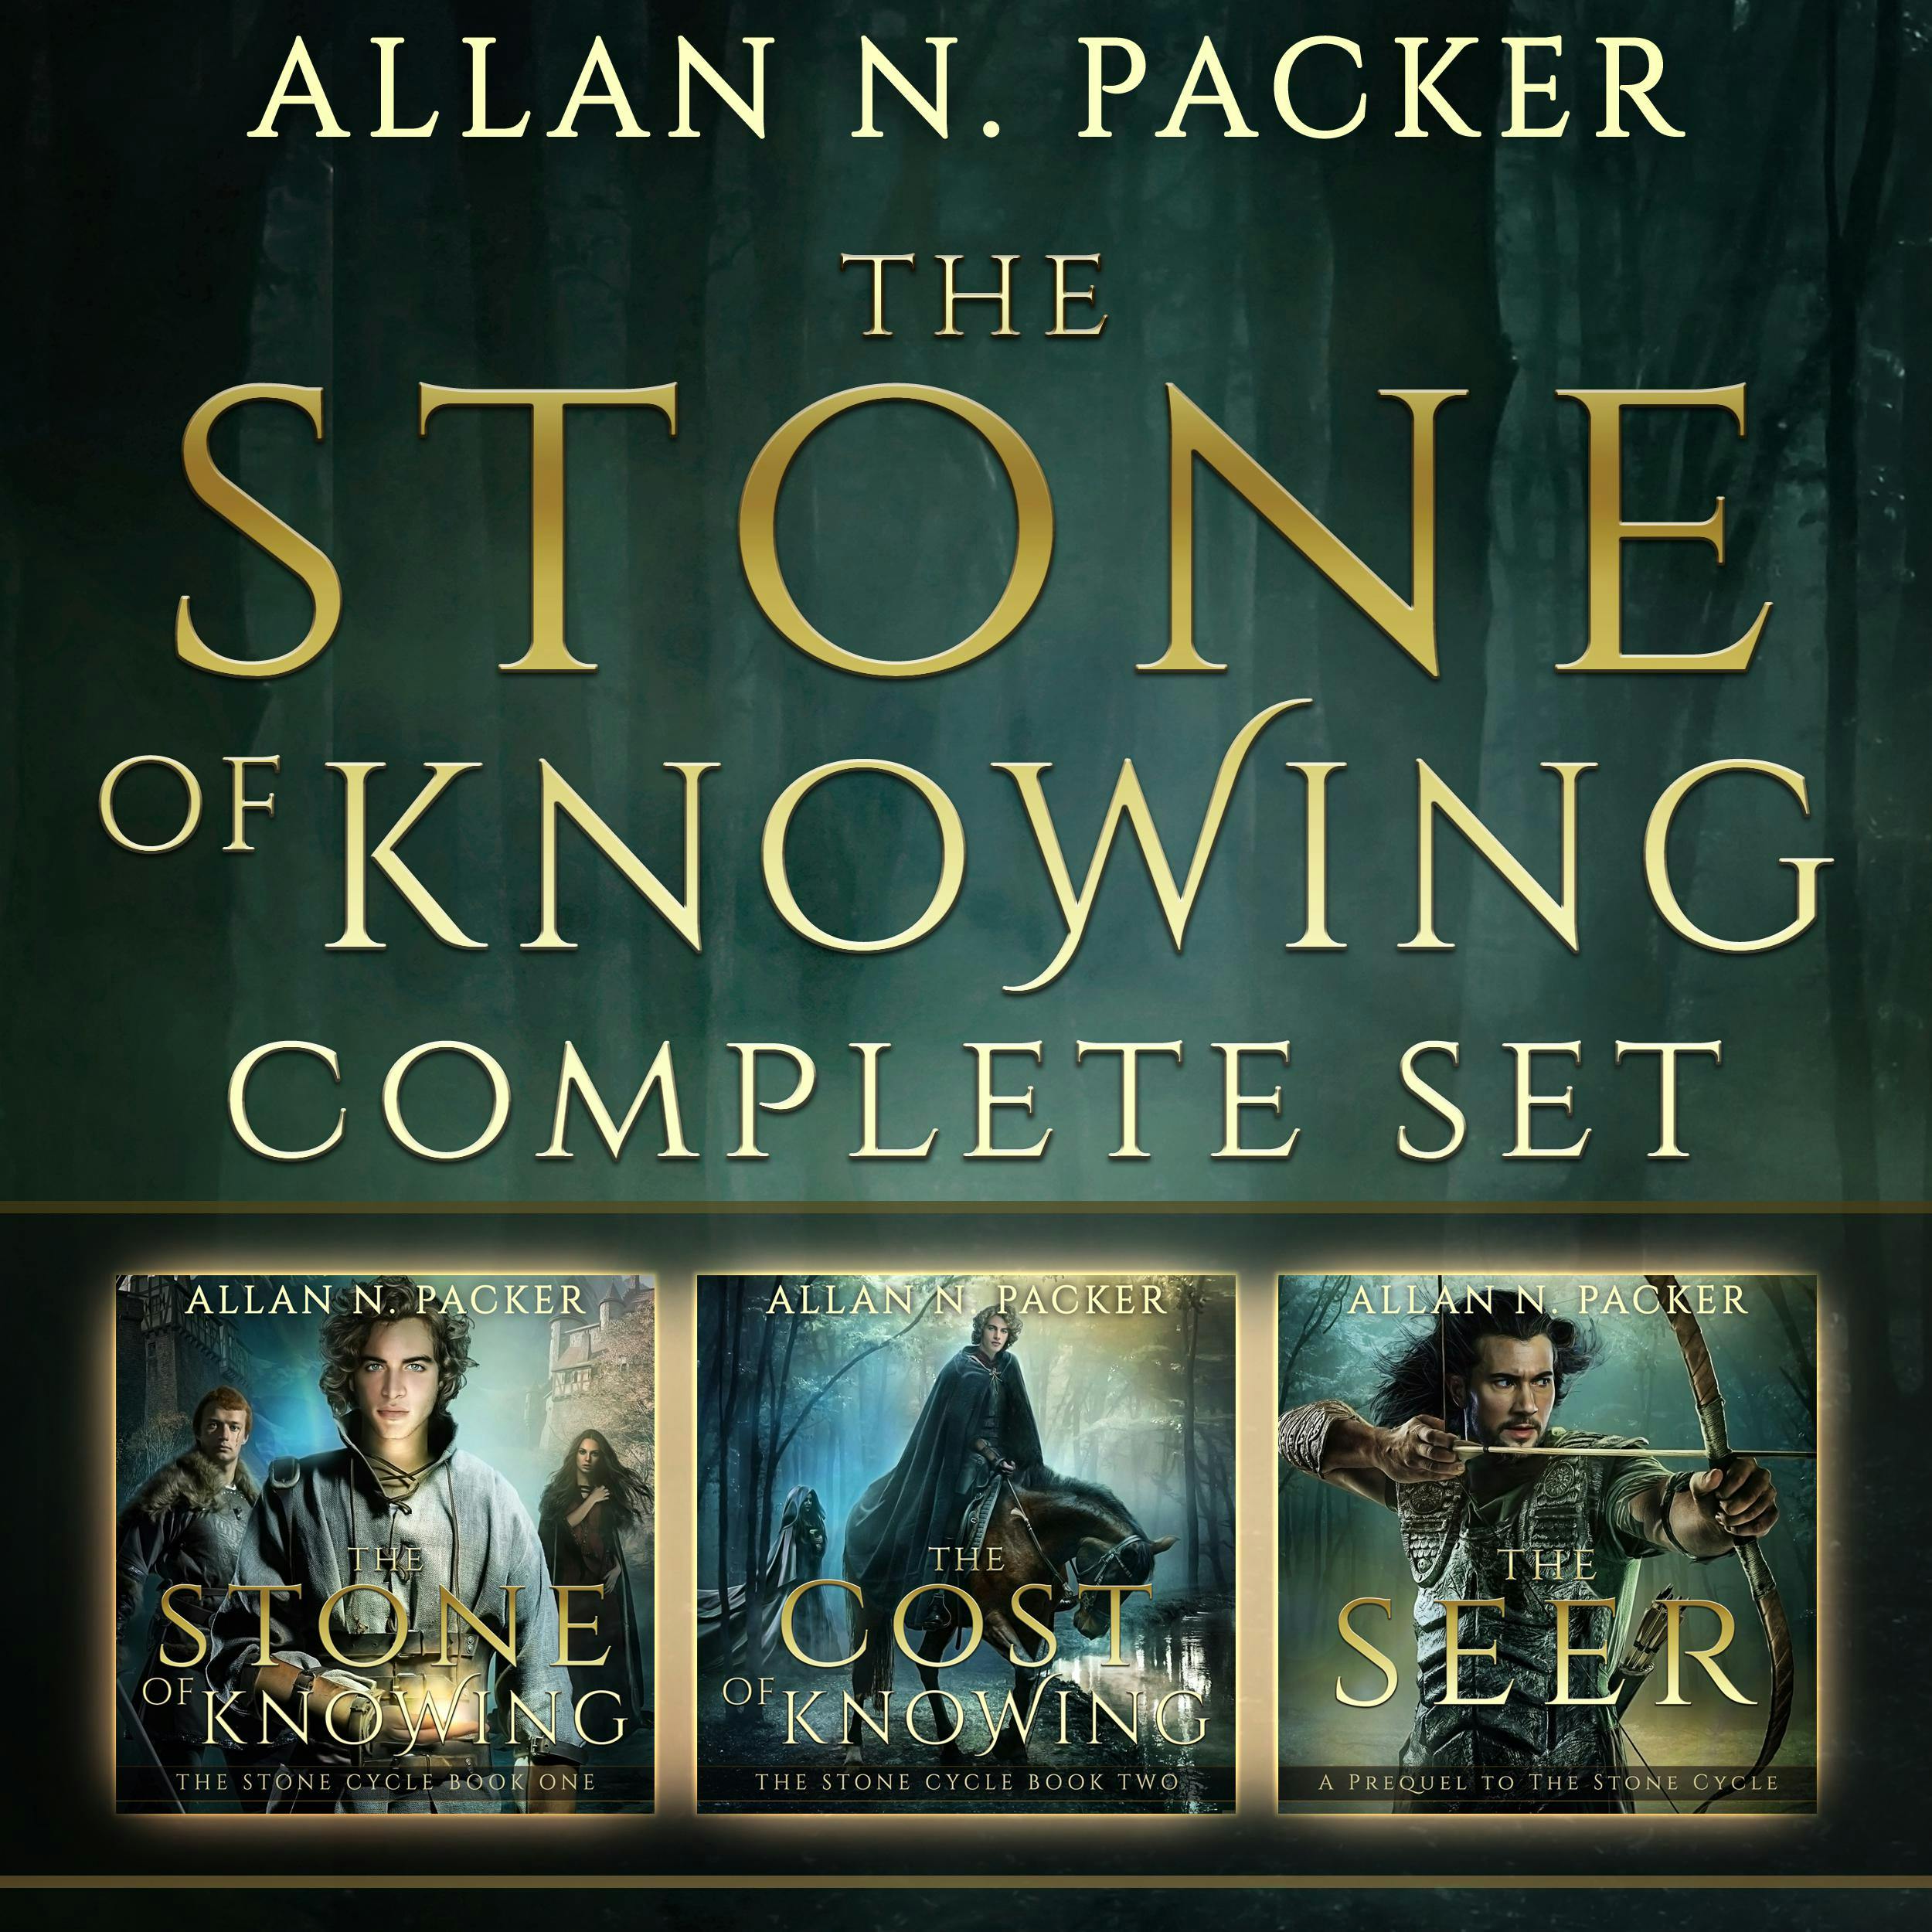 The Stone of Knowing Complete Set - Allan N. Packer